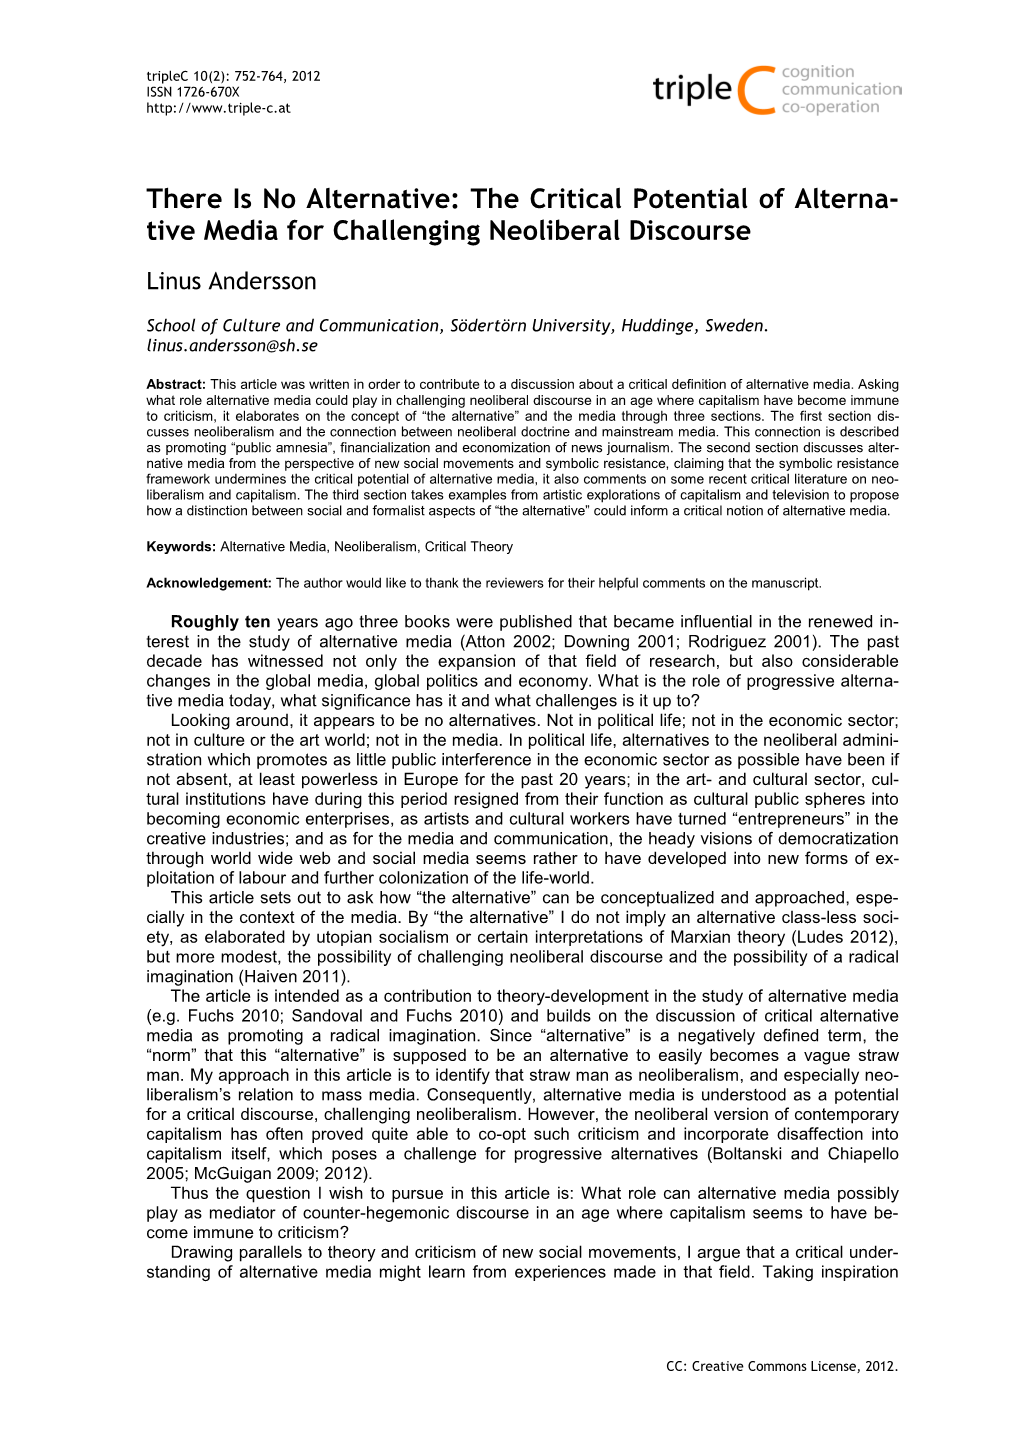 There Is No Alternative: the Critical Potential of Alterna- Tive Media for Challenging Neoliberal Discourse